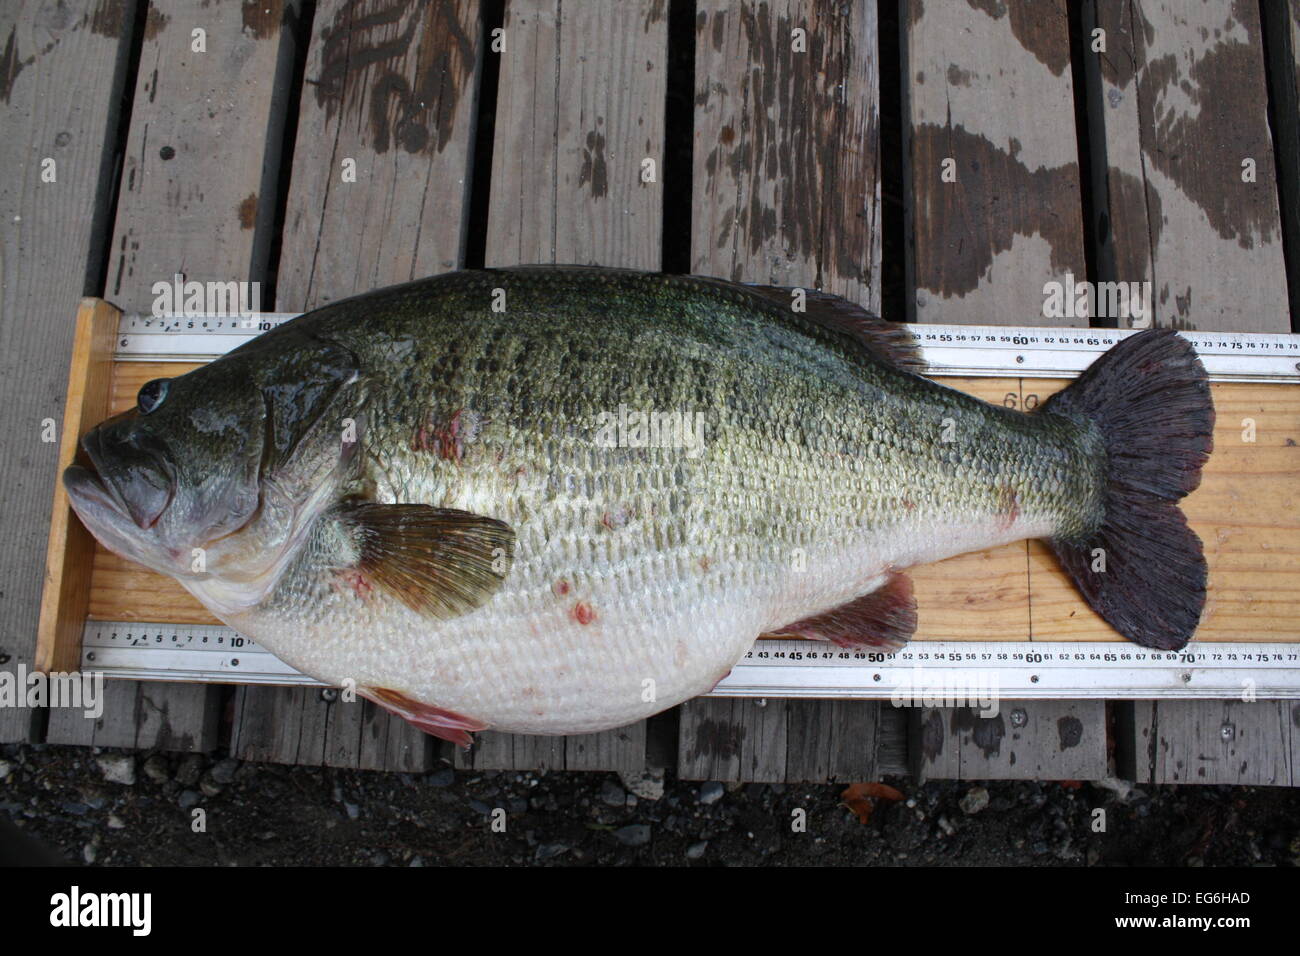 The 22.5-pound (10.12-kilo) Largemouth Bass is placed on a